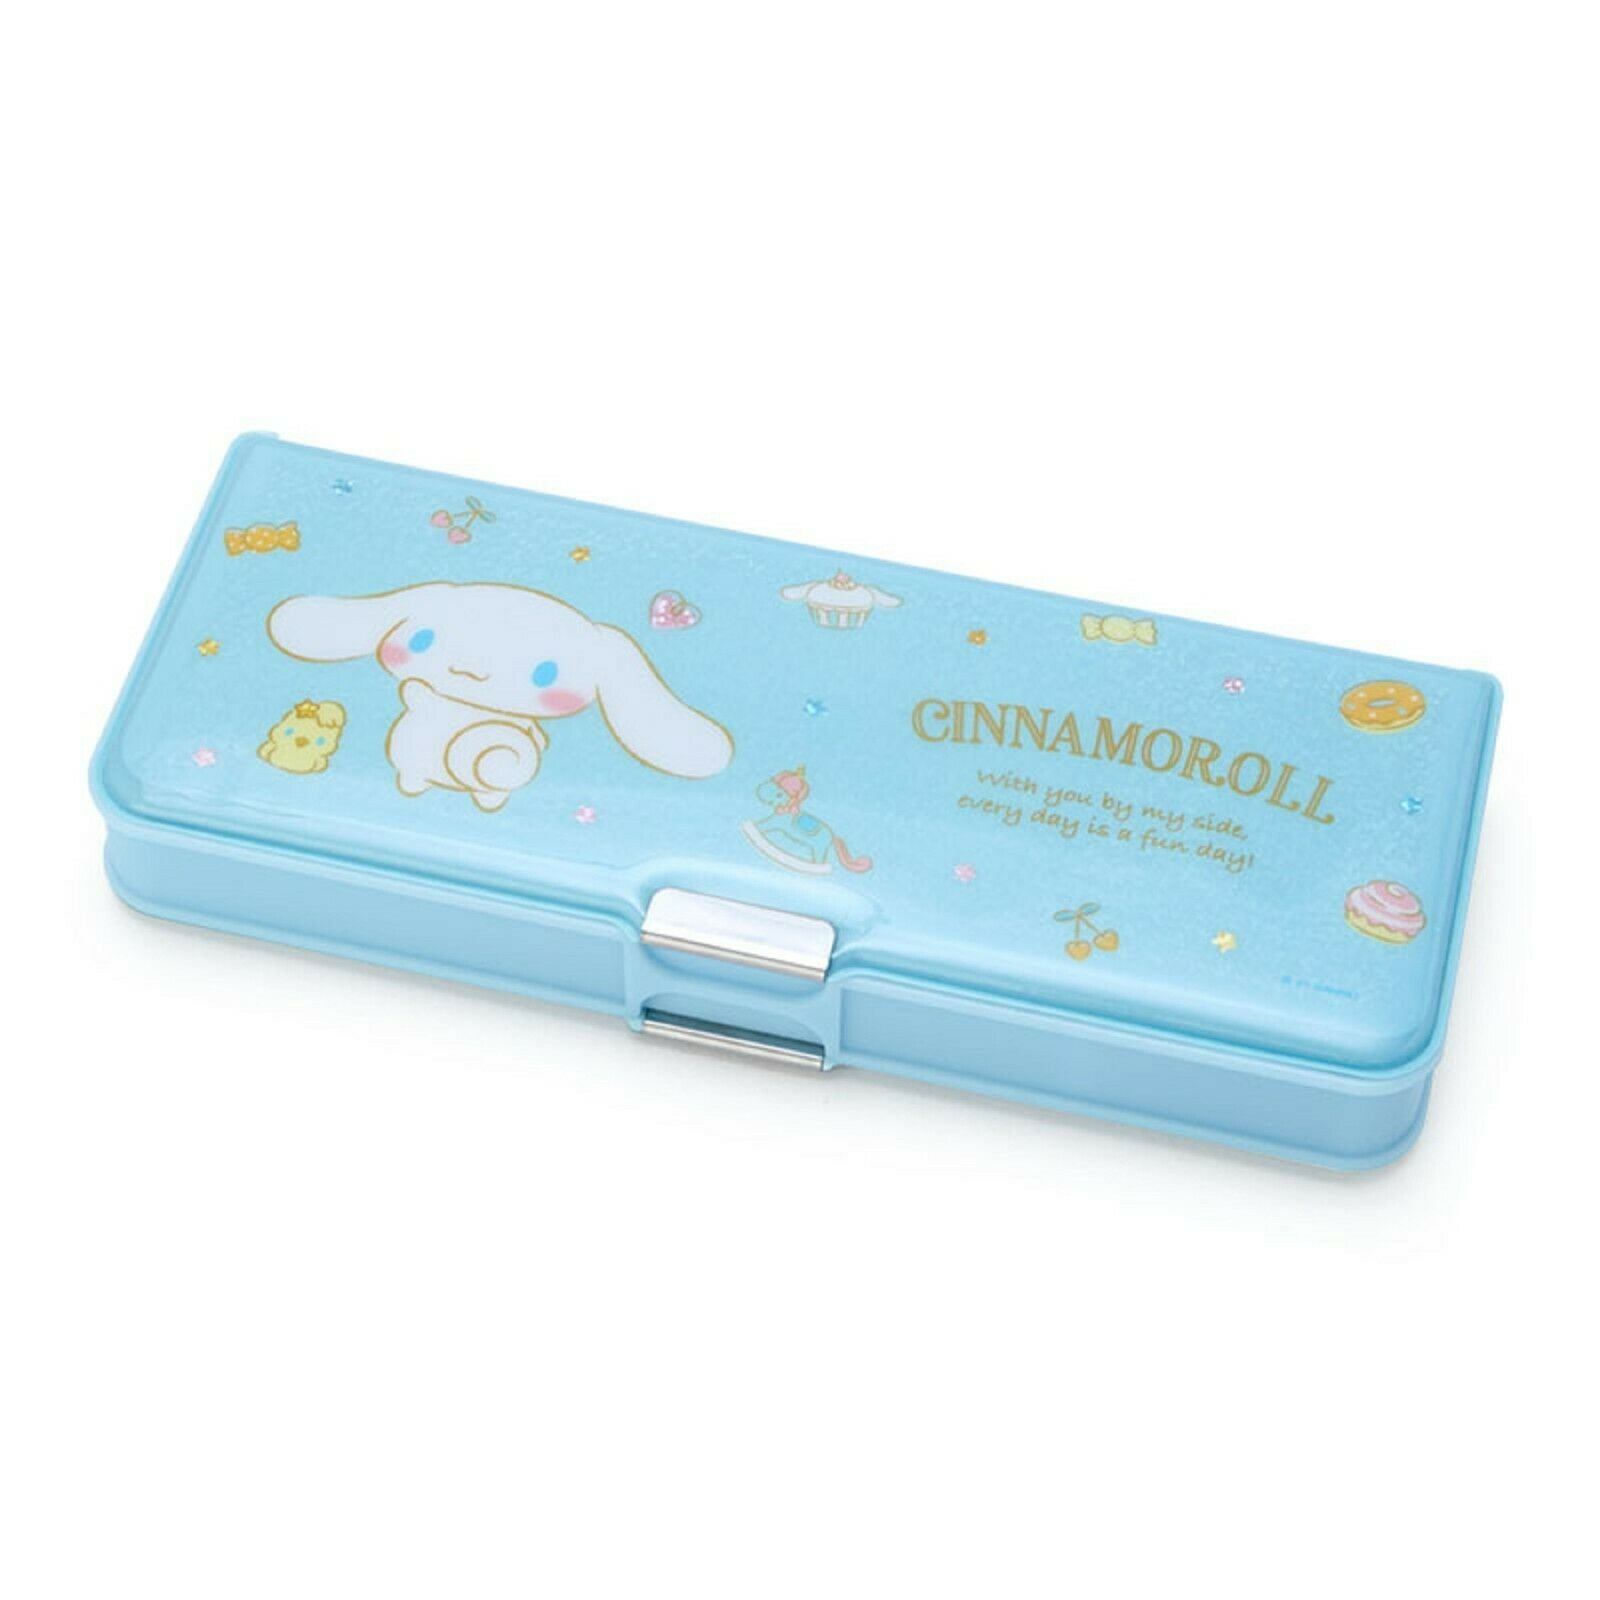 Cinnamoroll Double Sided Opening Pencil Case Stationery - Walmart.com